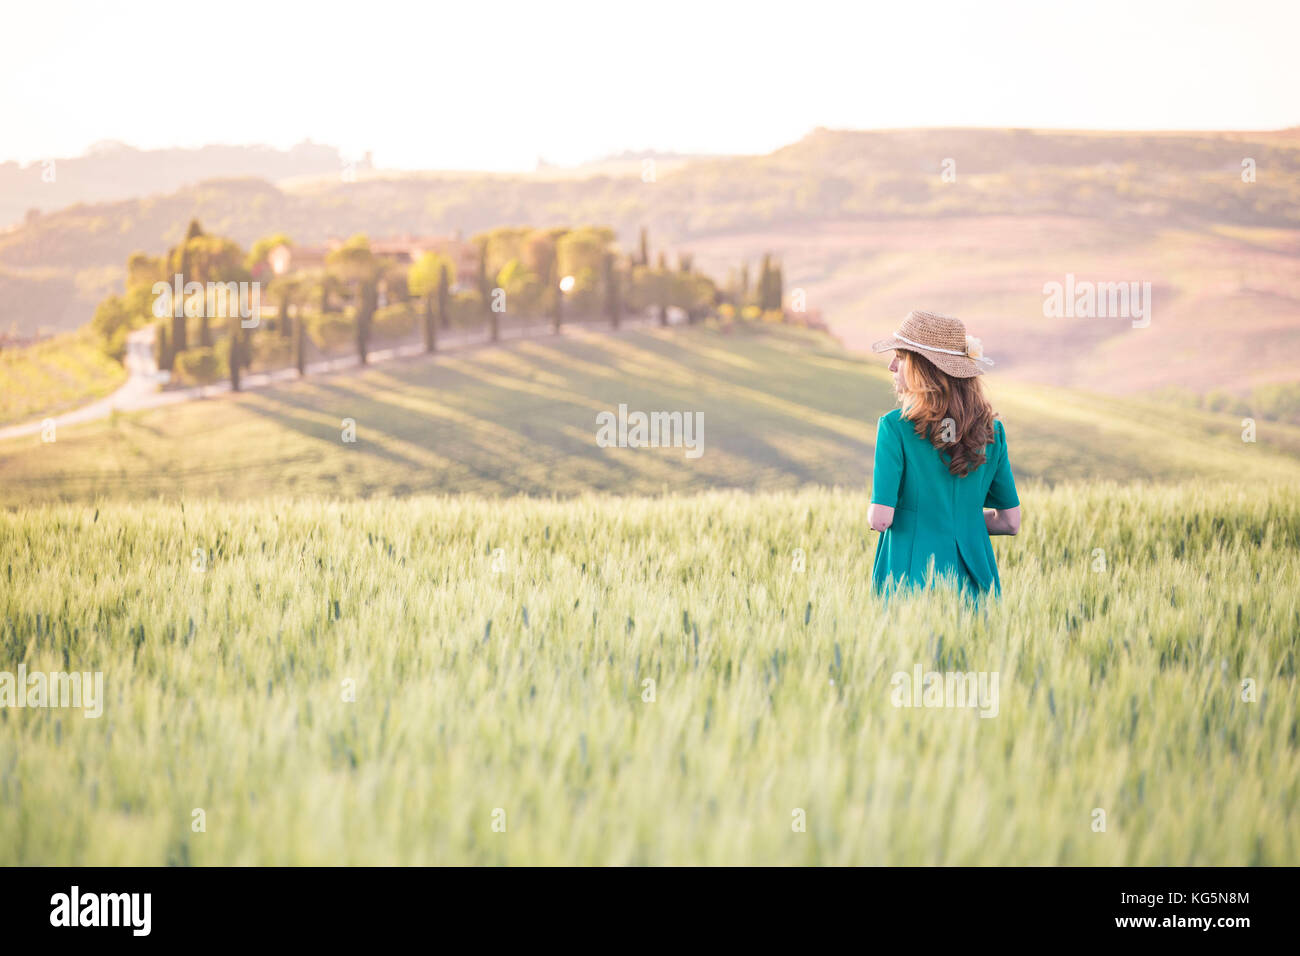 A girl in a green dress walking trough the golden fields of Tuscany. Val d'Orcia, Province of Siena, Tuscany, Italy Stock Photo